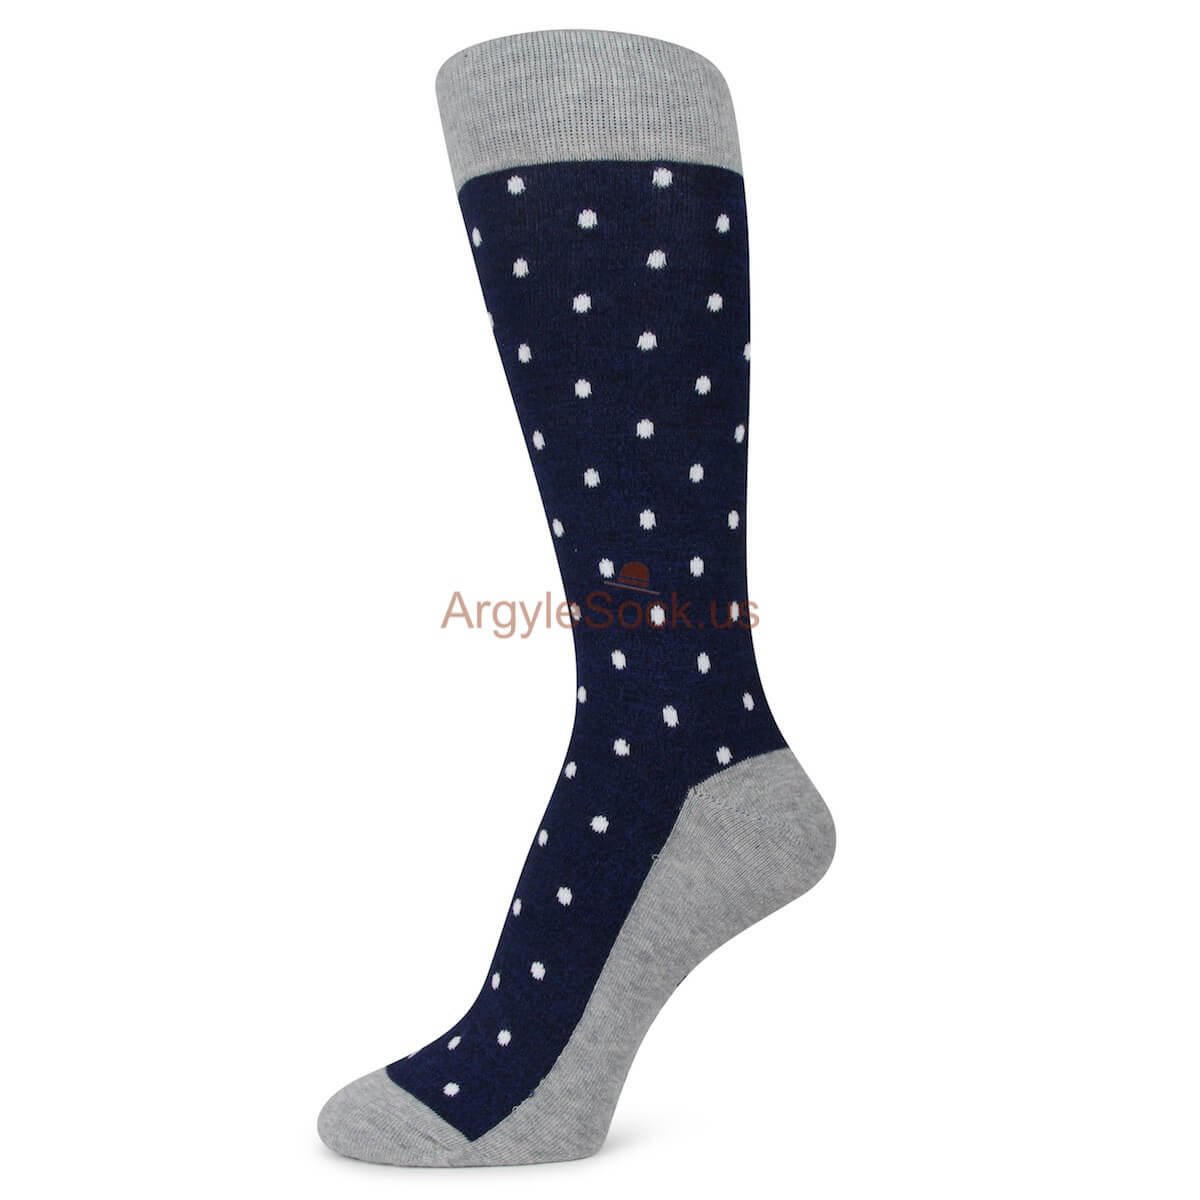 Grey and Dark Blue with White Dotted Socks For Men